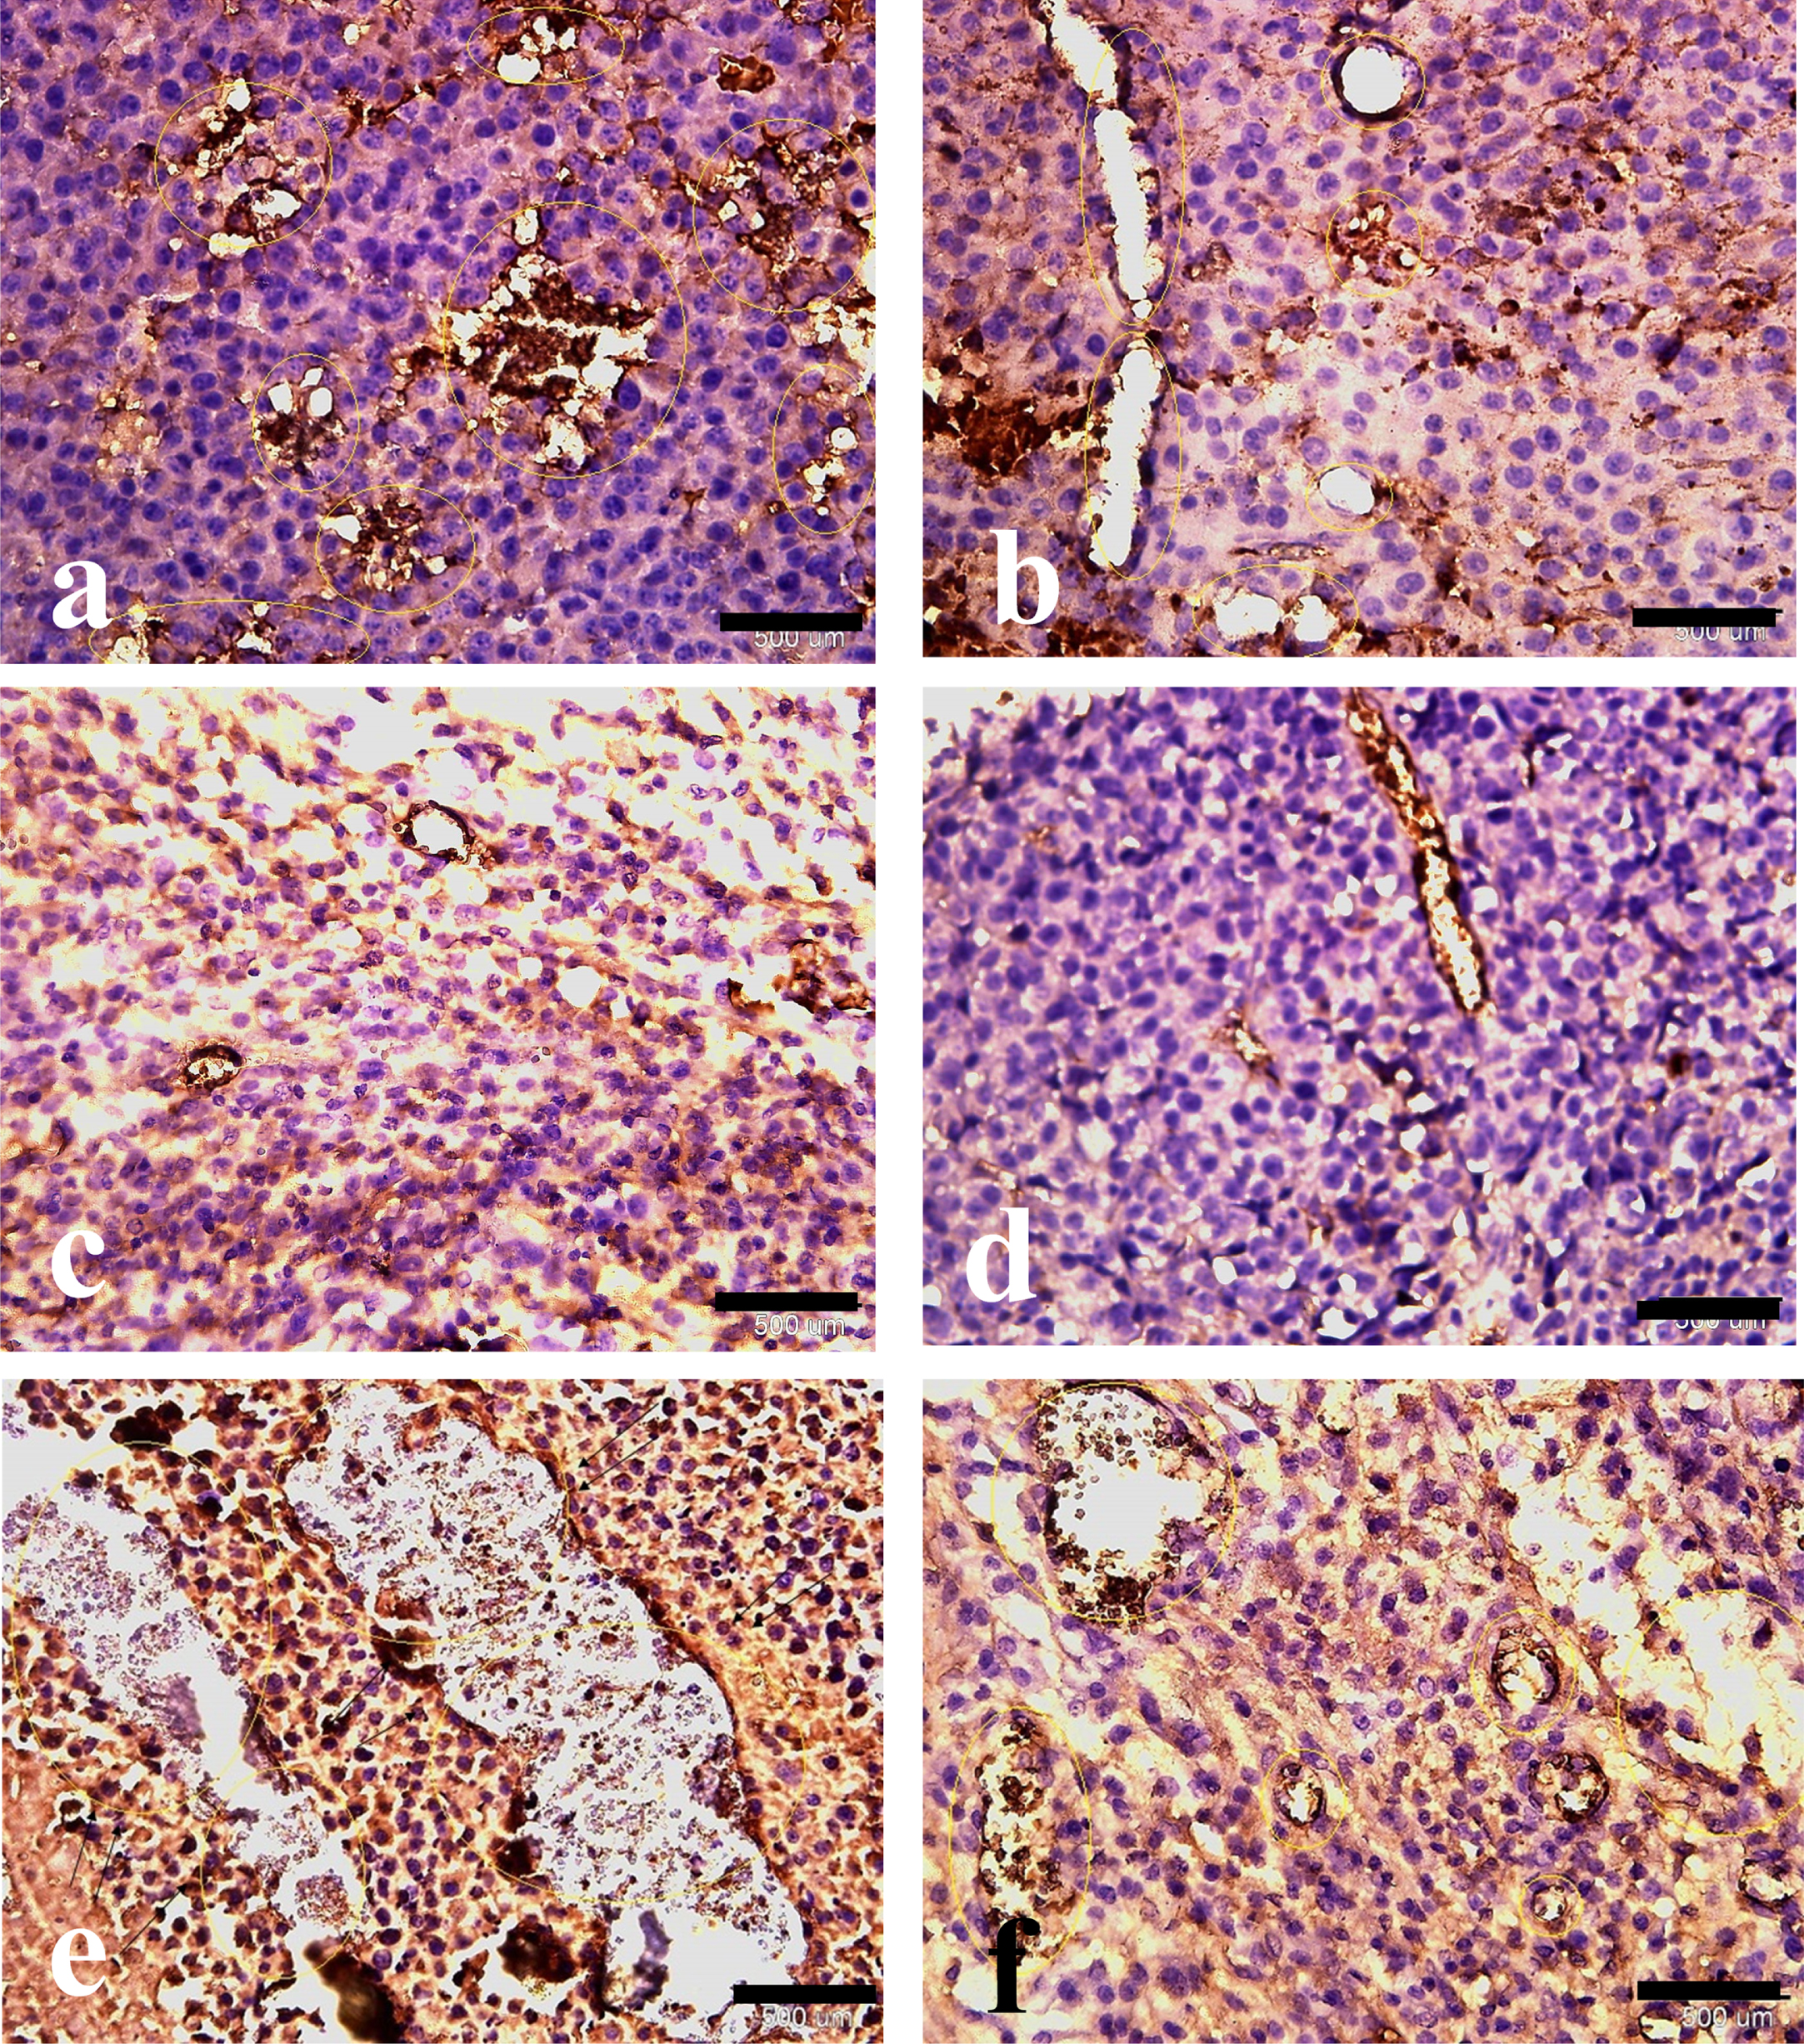 Hematoxylin and eosin with anti-CD31 immunohistochemical staining of melanoma tumor tissue. Effect of HIF-1α and ALK5 signaling pathways on tumor vessel density in a mouse melanoma model between the control and treatment groups (40x magnification). Picture A represents CD31 staining in the control group. Pictures B, C, D, E, and F represent CD31 staining in HIF-ihb, HIF-ihb/Alk5-ihb, Alk5-ihb, HIF-act, and HIF-act/Alk5-ihb groups respectively. Alk5-ihb: ALK5 inhibitor, HIF-ihb: HIF-1α inhibitor, HIF-act: HIF-1α activator. Scale bar is 500 um.